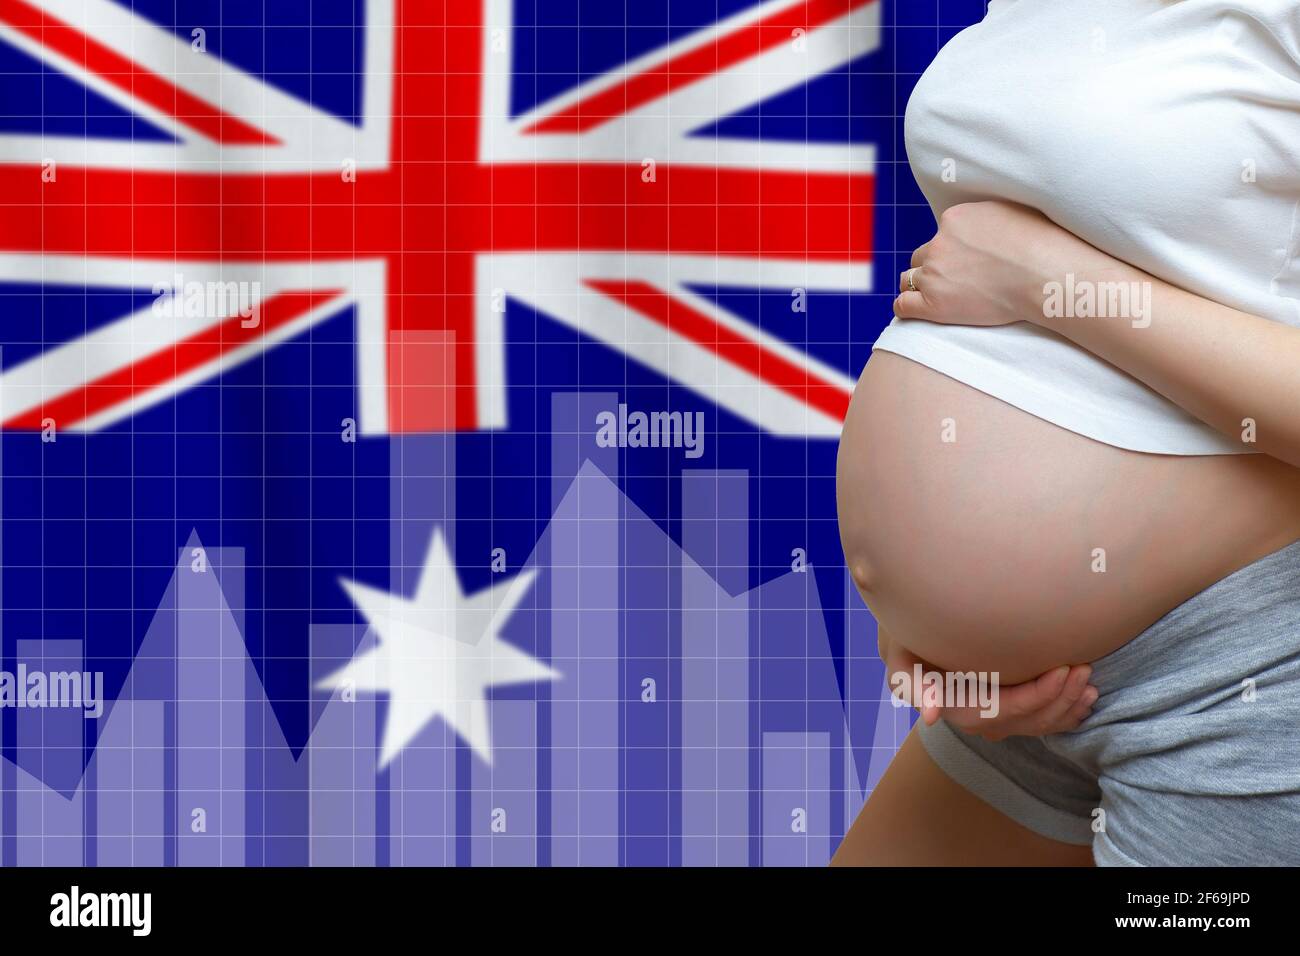 Fertility concept in the Commonwealth of Australia. Pregnant woman on the background of the flag with graphs Stock Photo